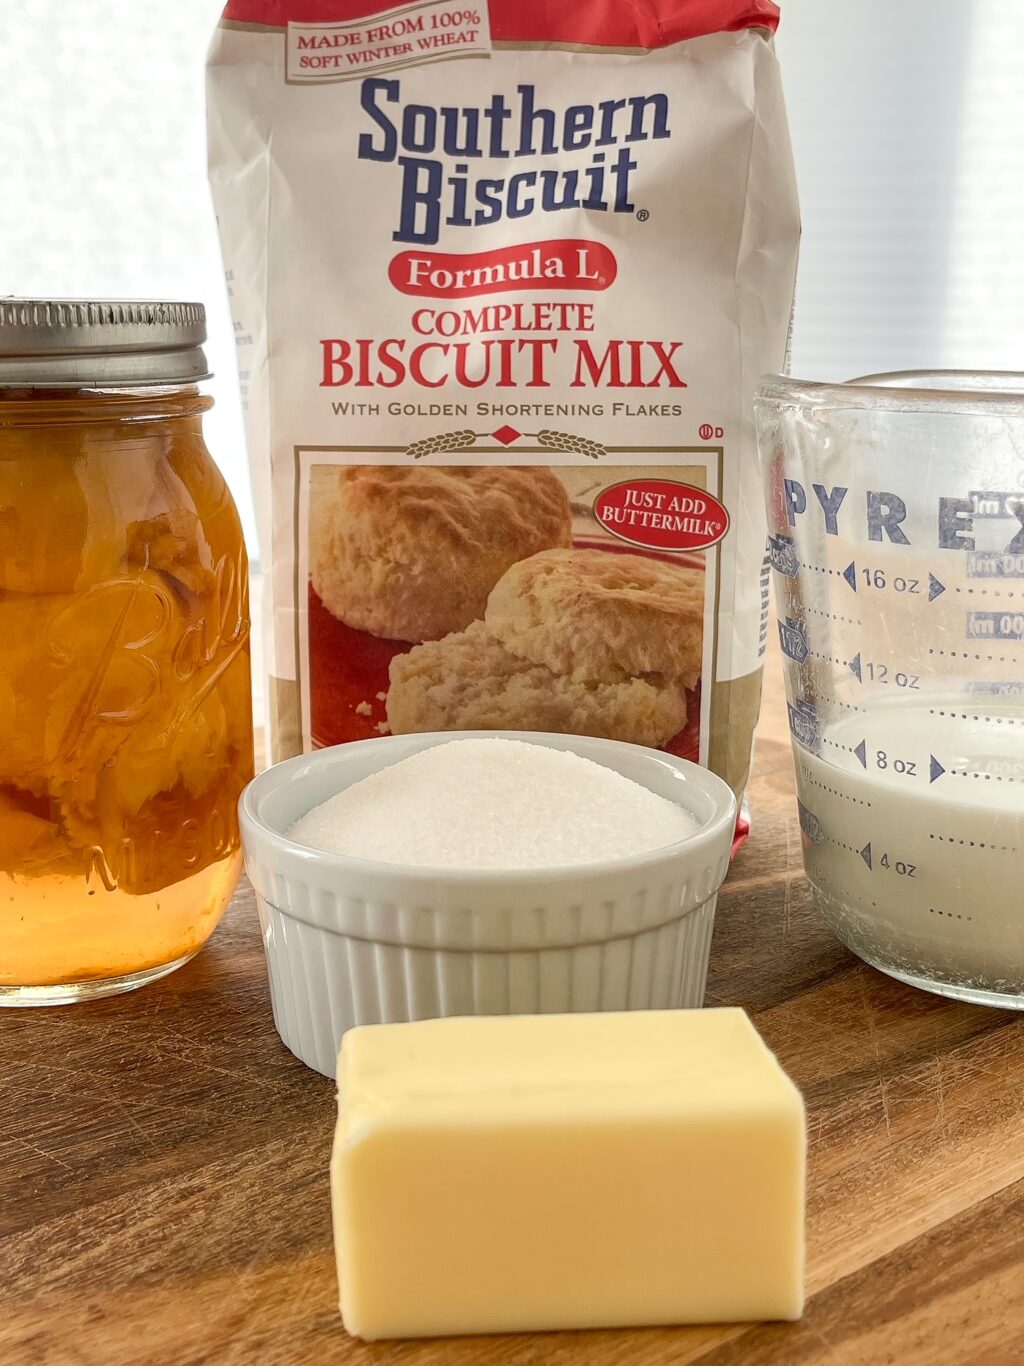 ingredients needed for peach cobbler including southern biscuit mix